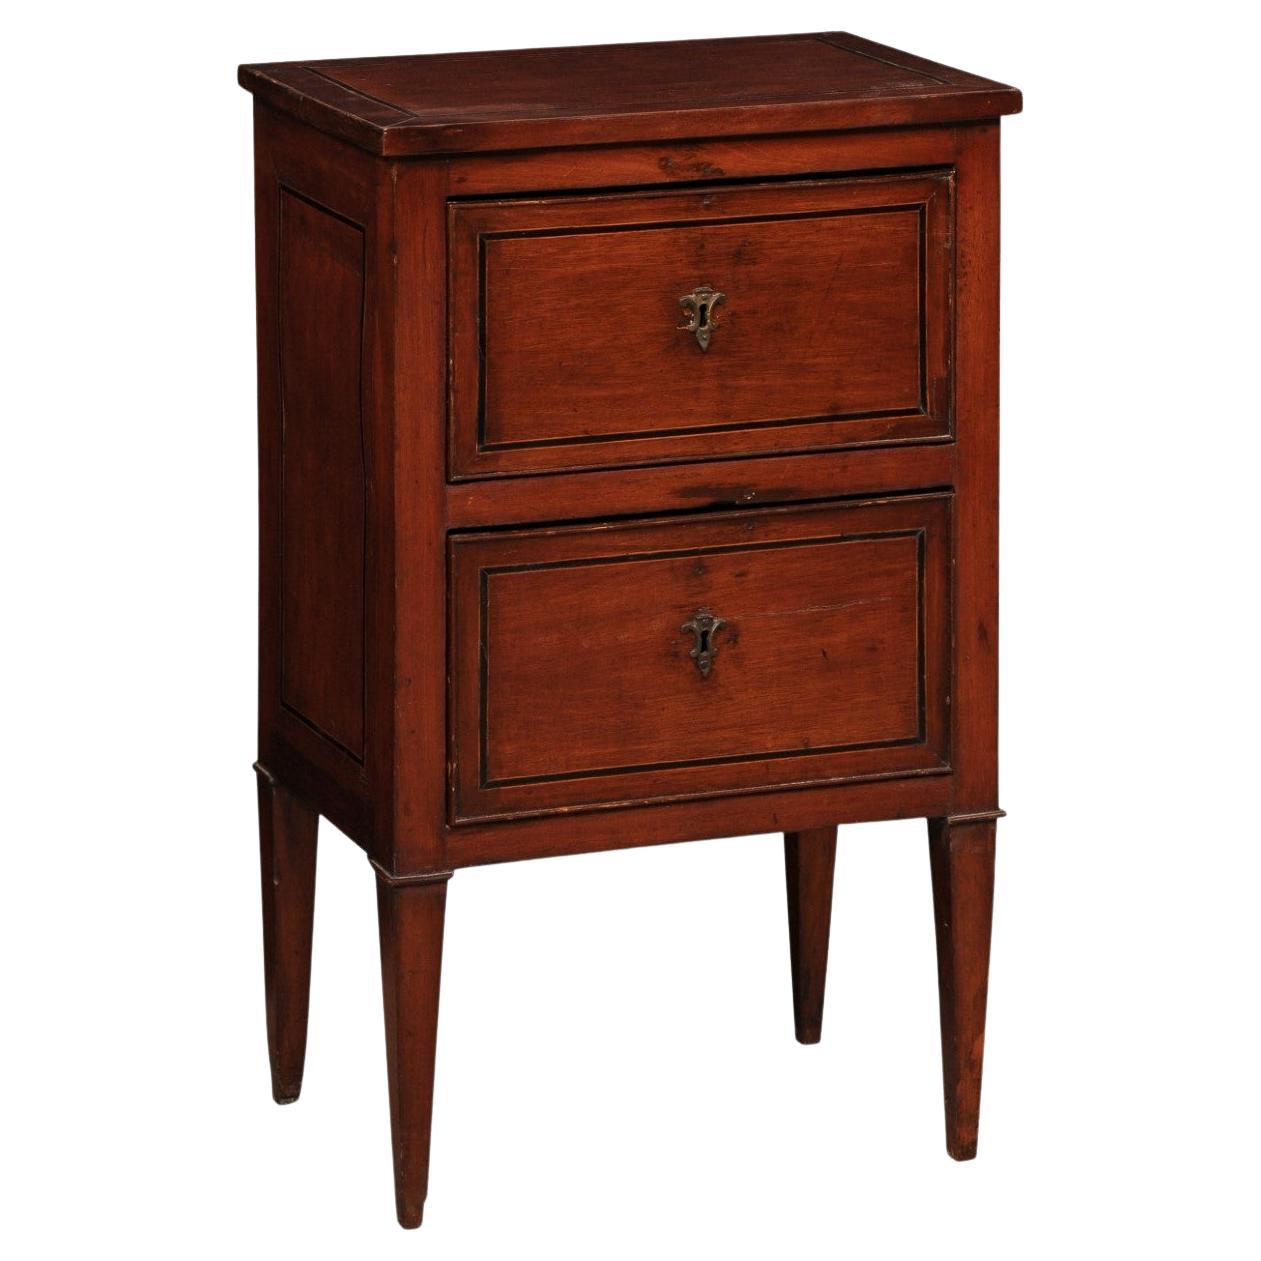 Italian 19th C. Side Chest Designed in Clean Lines w/Accent Inlay Trim